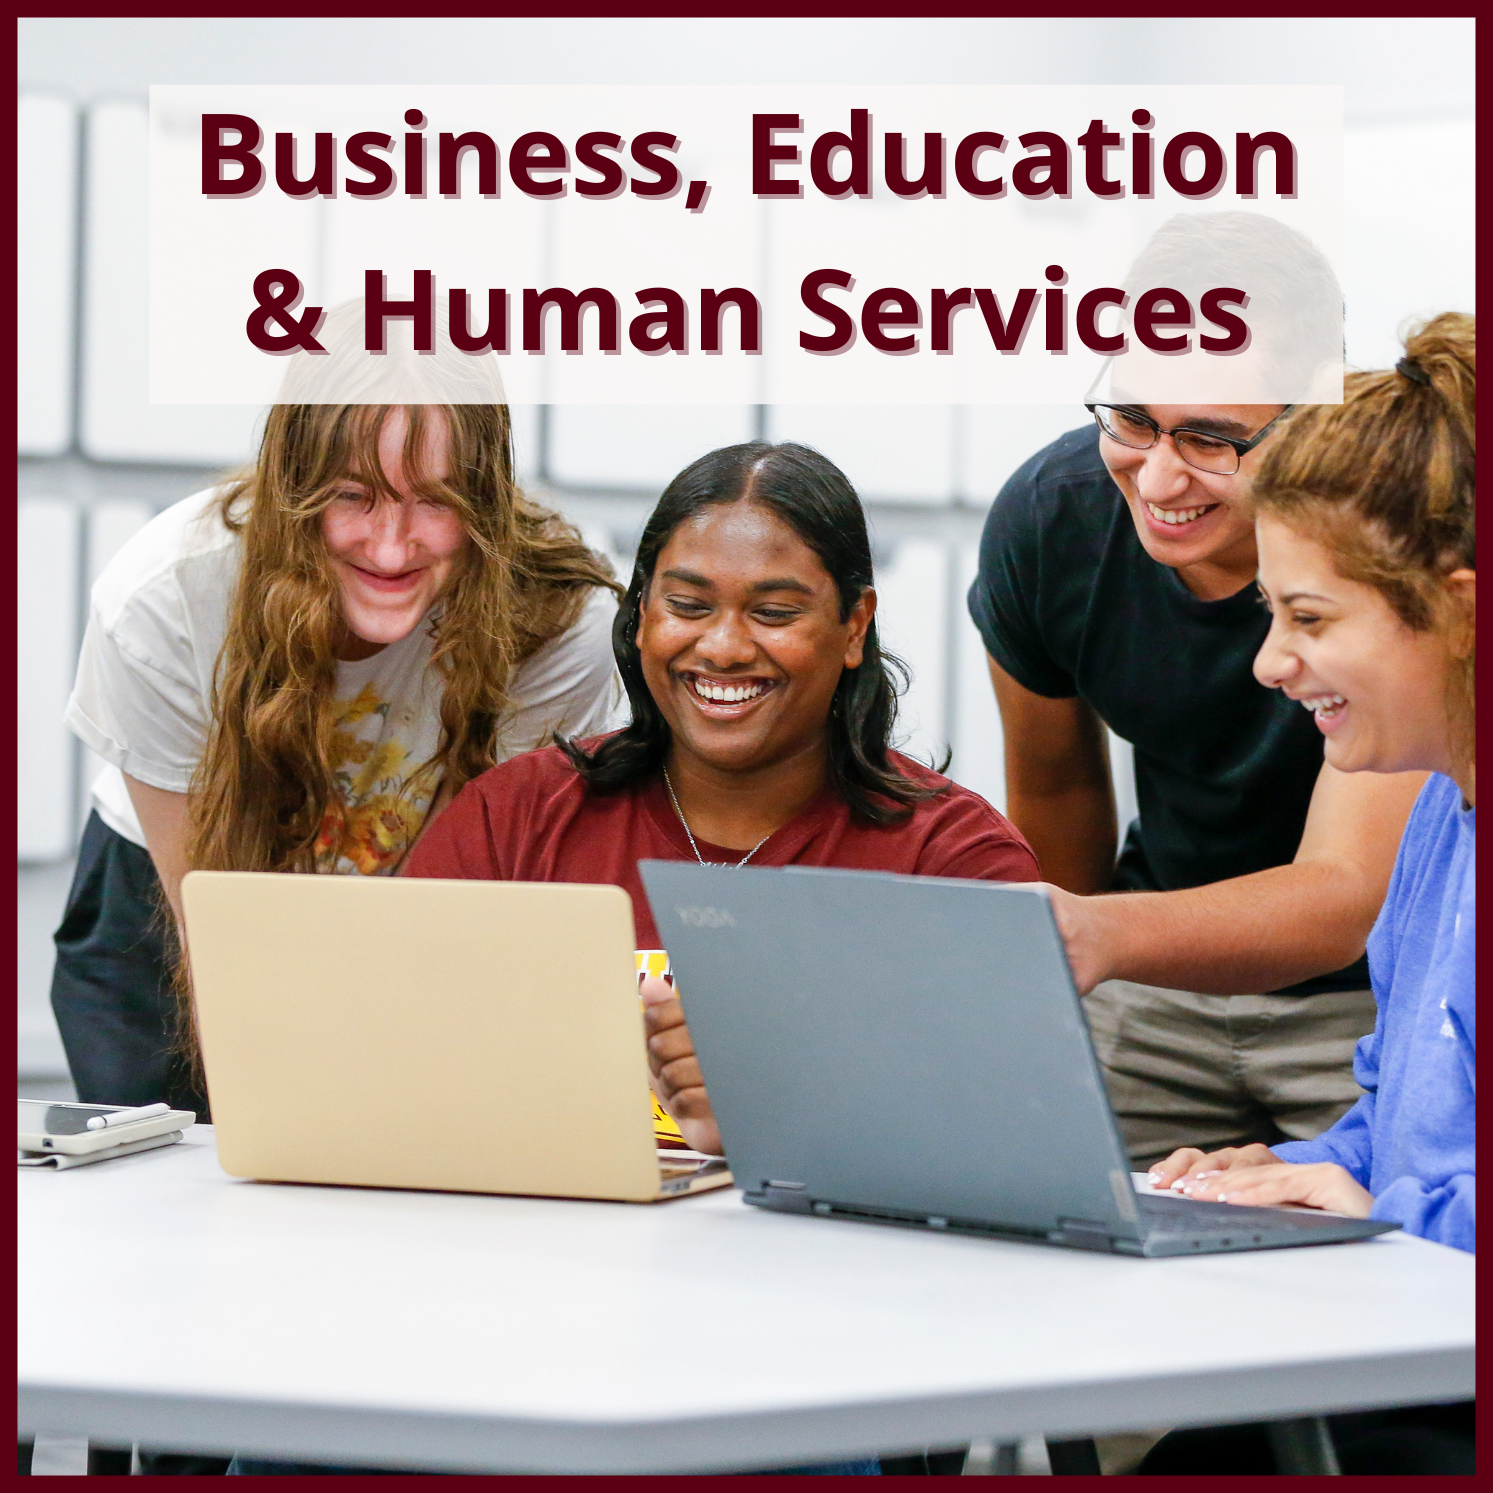 Business, Education & Human Services with a photo of students smiling while gathered around a laptop